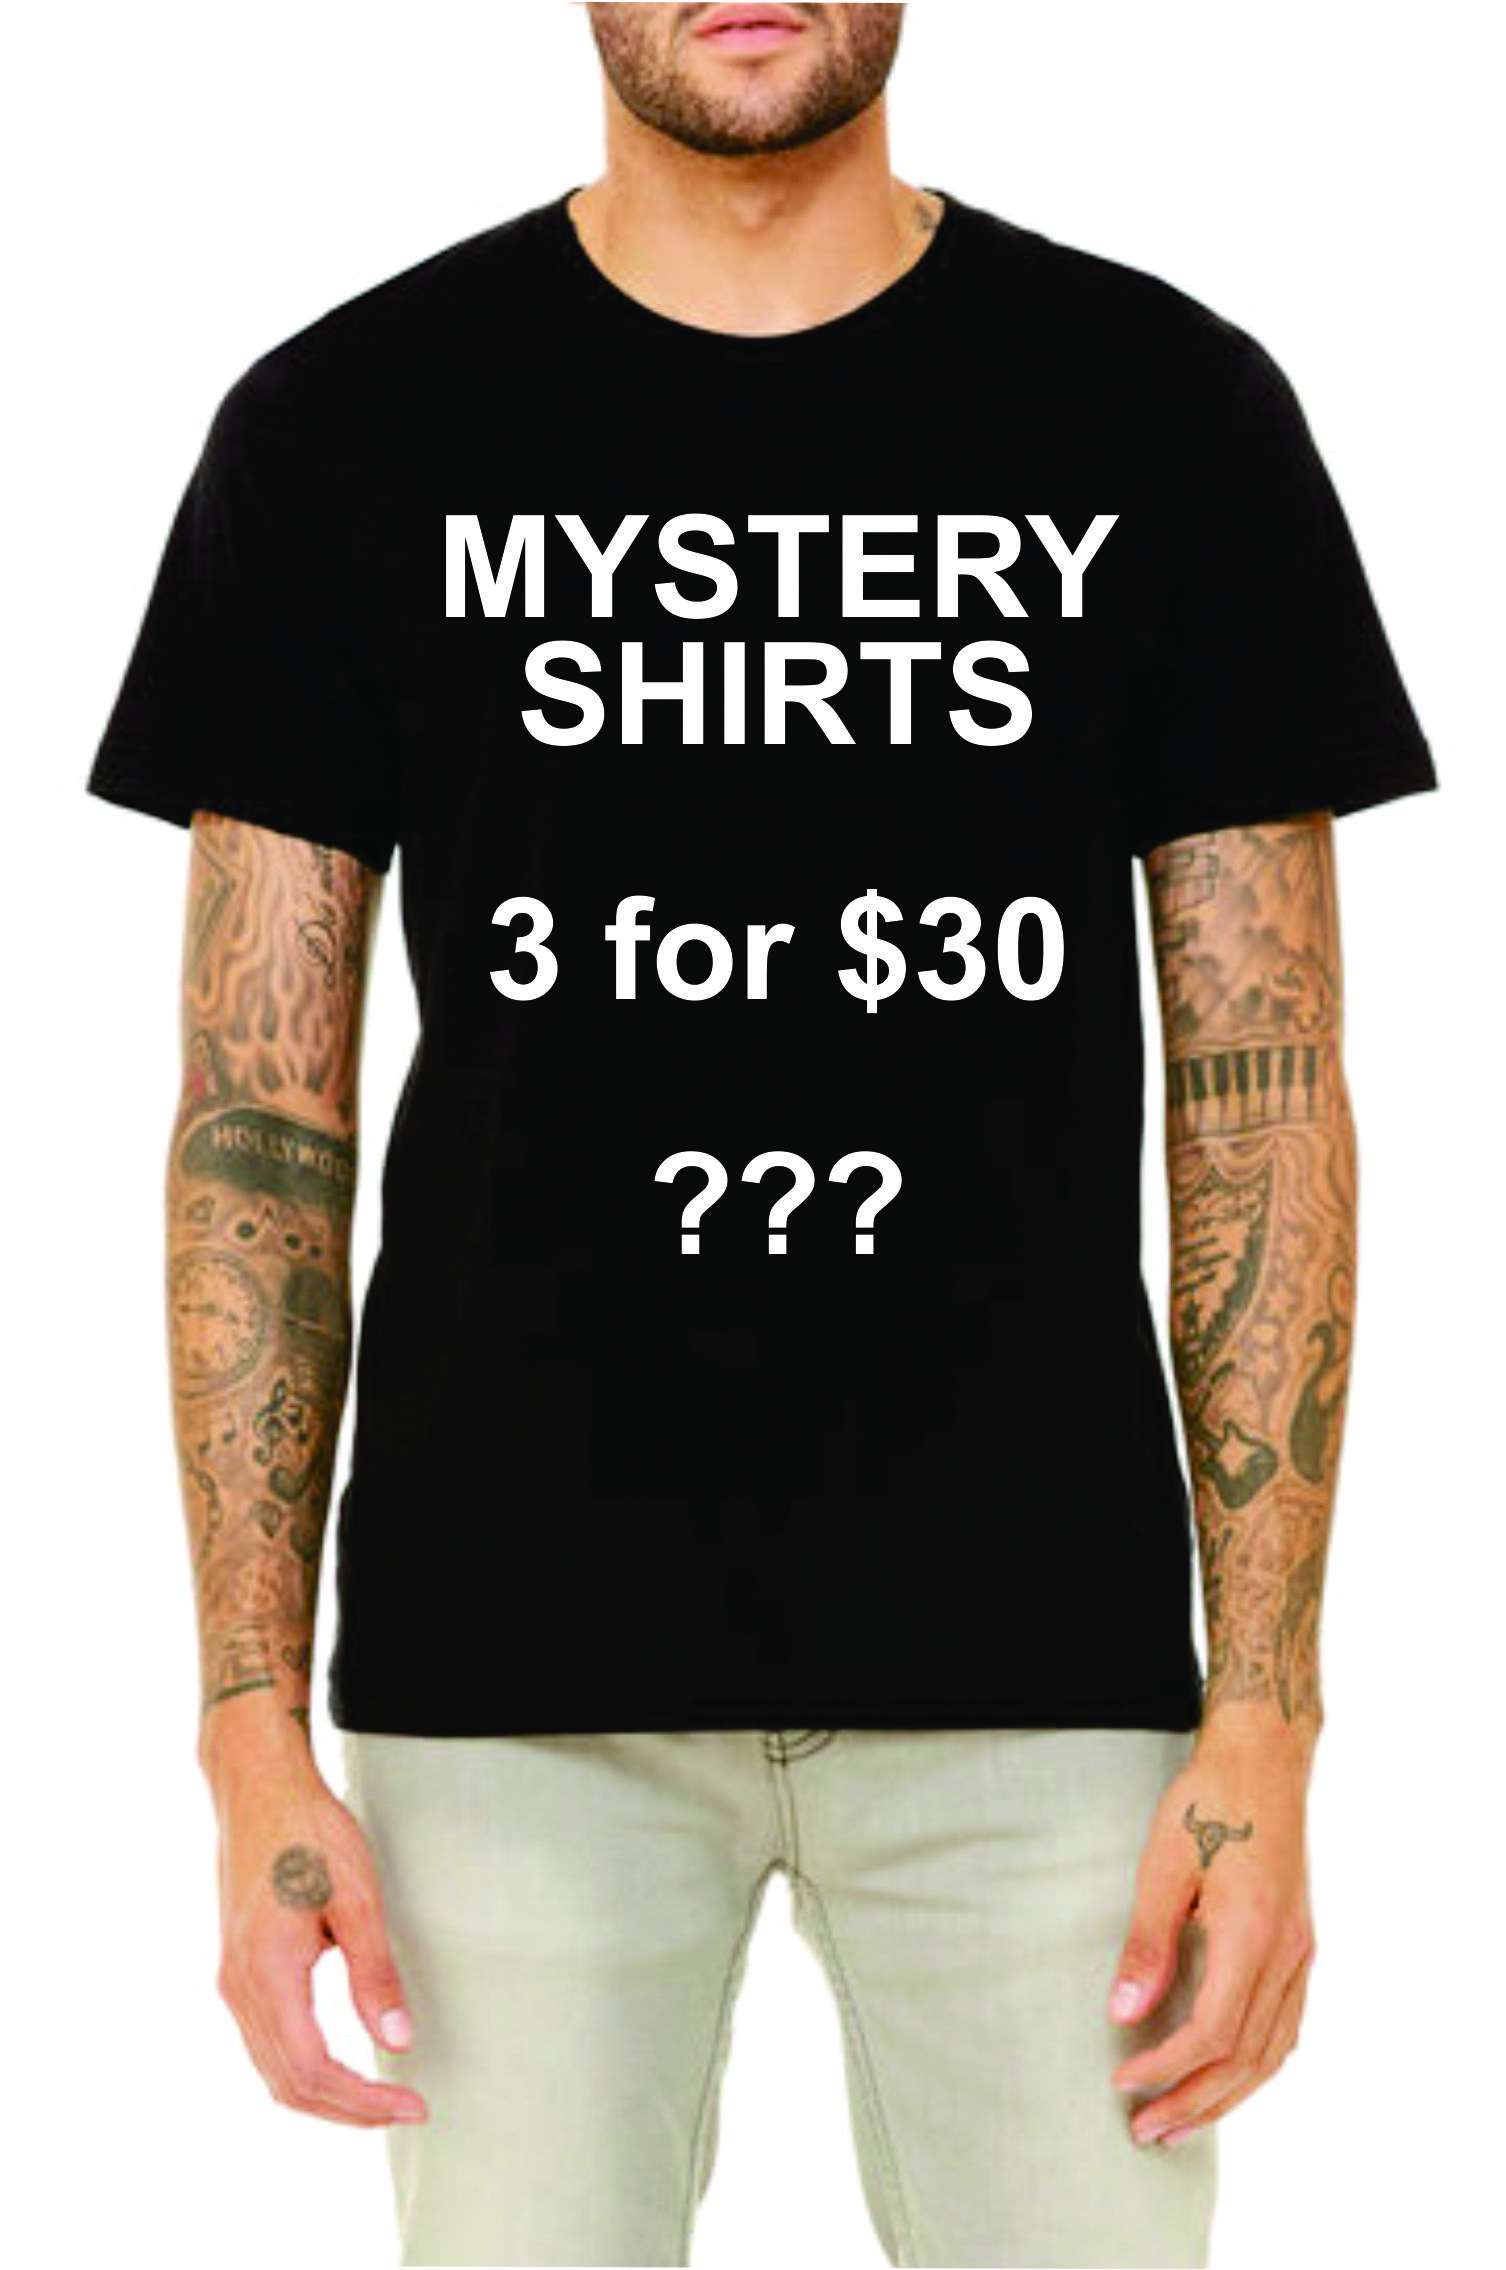 Three Mystery Shirts for $30